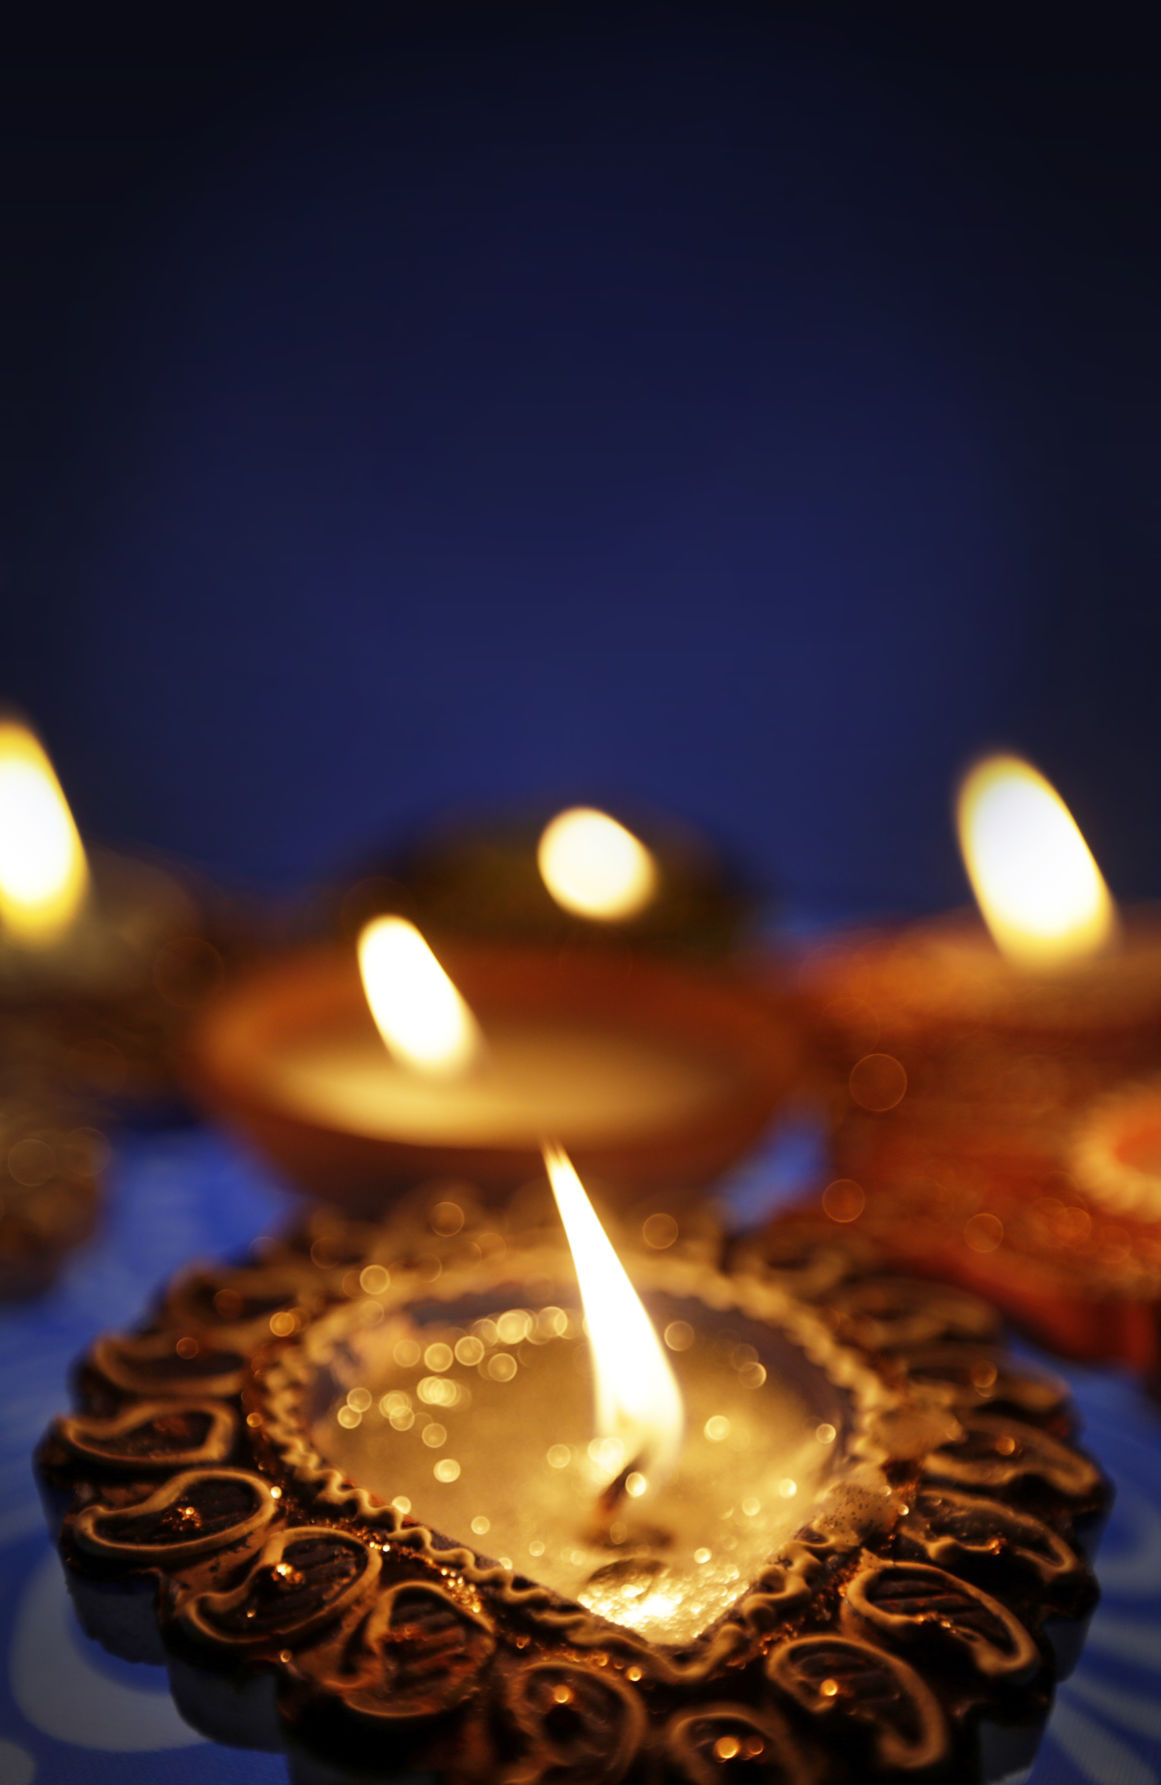 Let there be light Diwali celebrates the end of the Hindu lunar